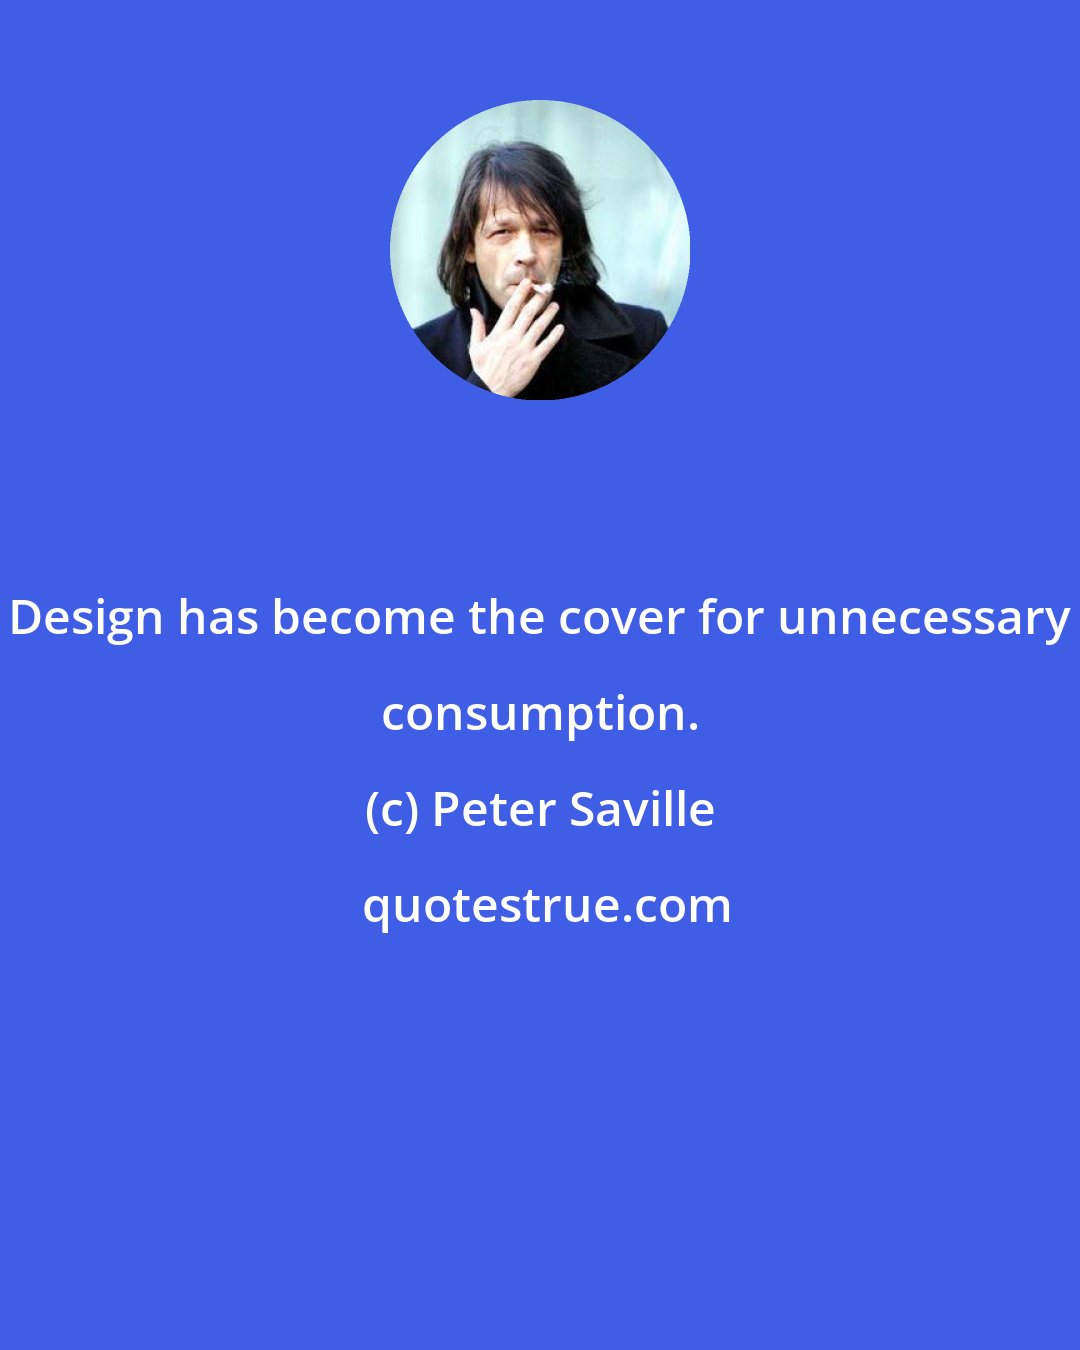 Peter Saville: Design has become the cover for unnecessary consumption.